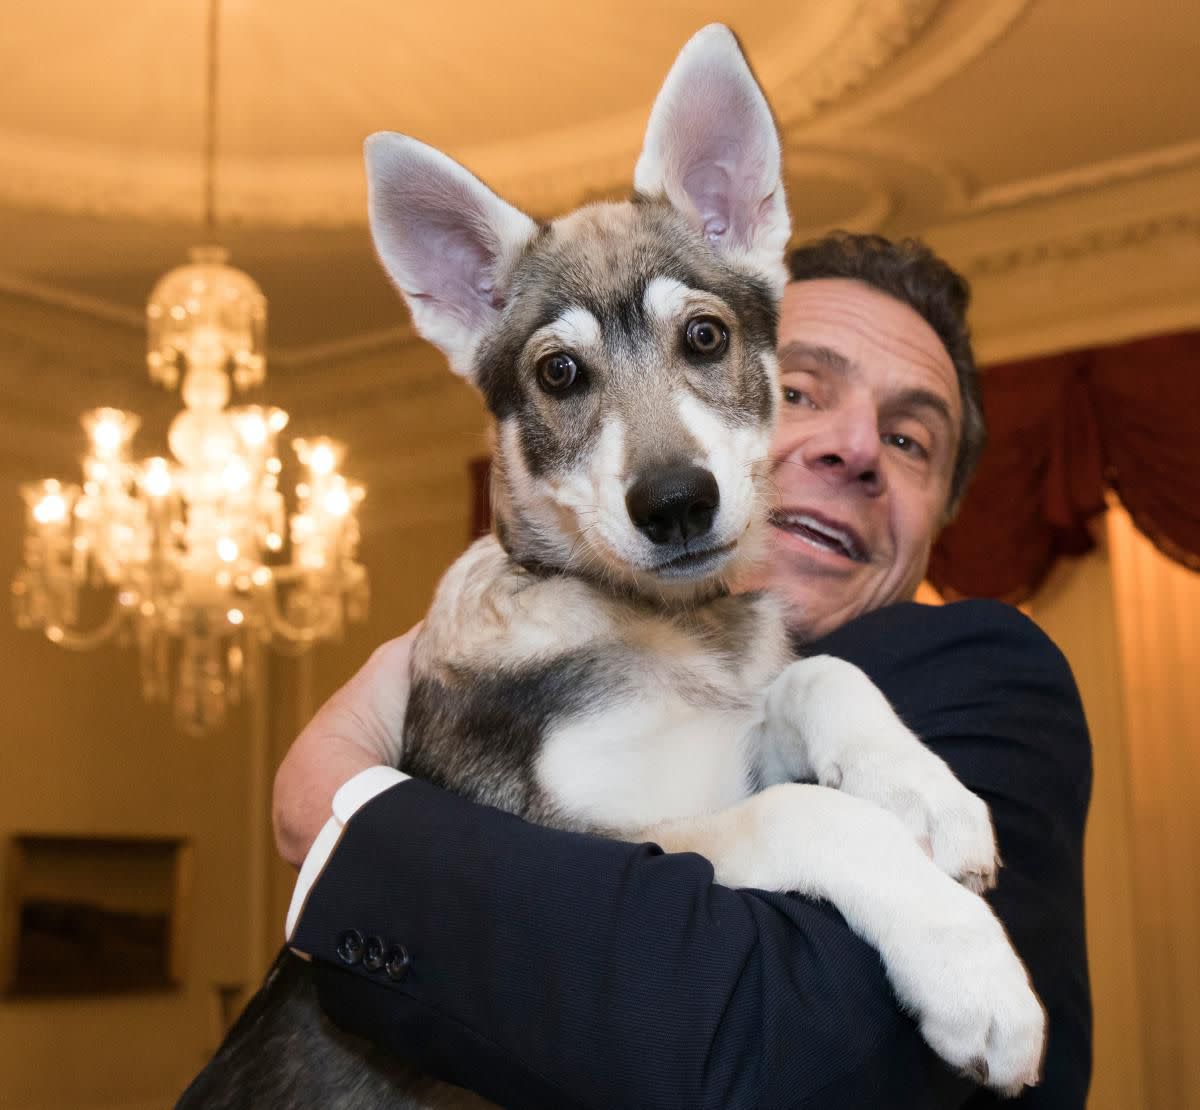 New York Gov. Andrew Cuomo and his dog, "Captain"